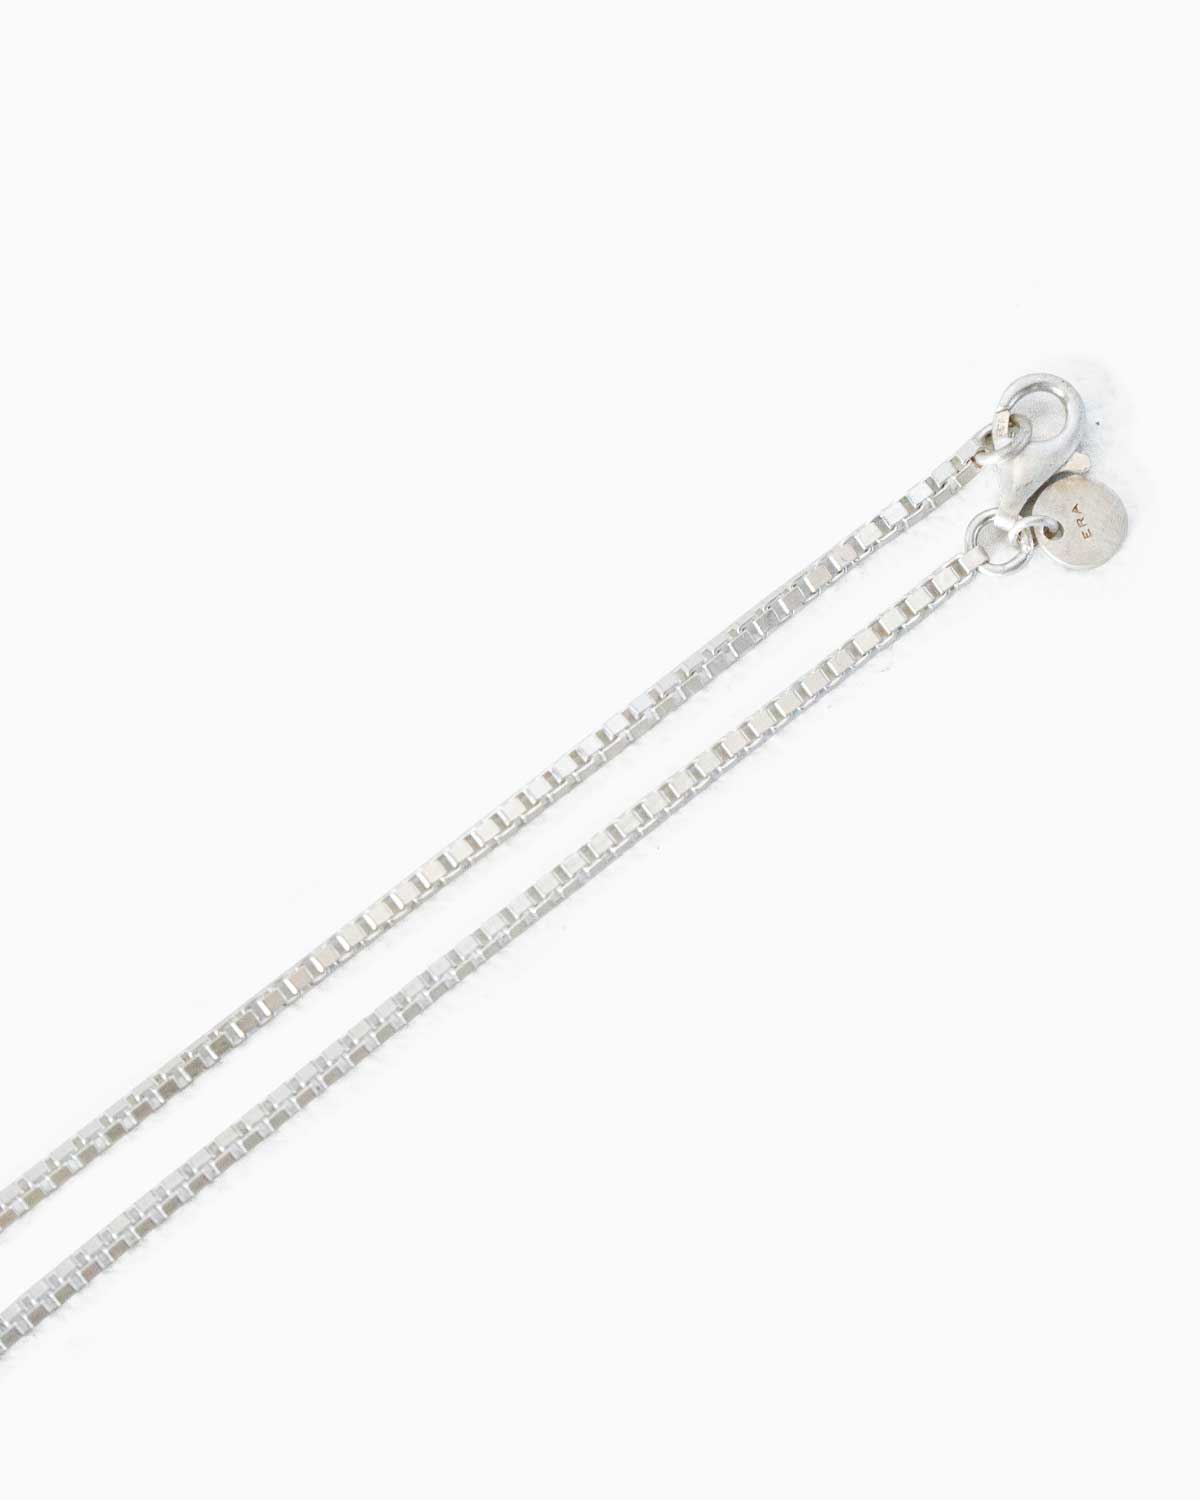 Tranescent / TWNKL NECKLACE 2.0 SILVER925